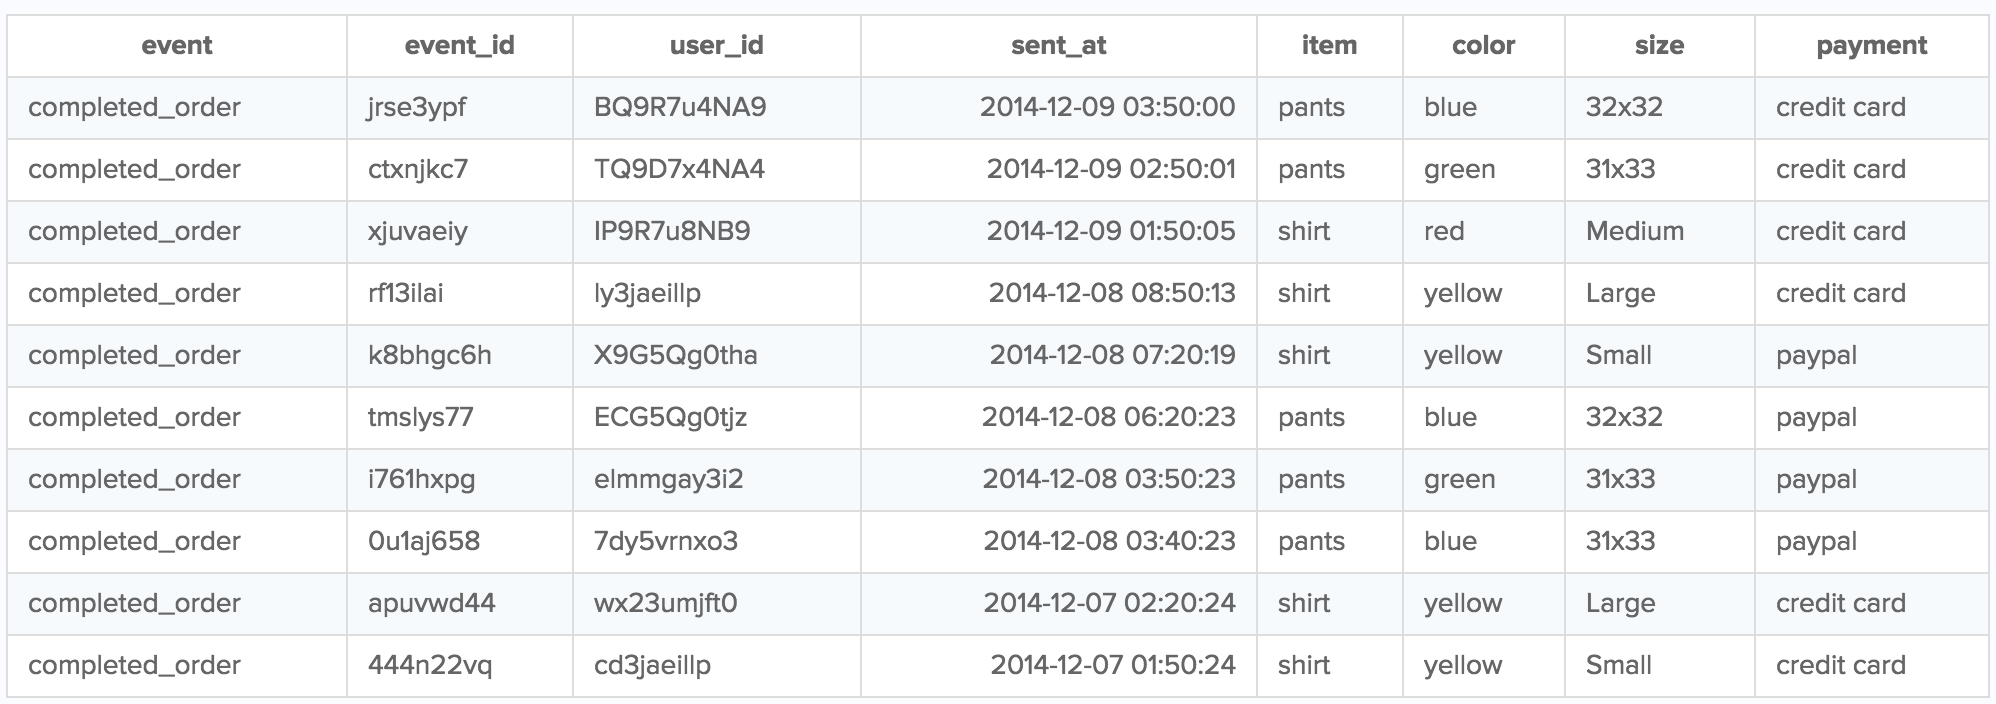 Screenshot of a SQL table, with event, event_id, user_id, sent_at, item, color, size, and payment columns.